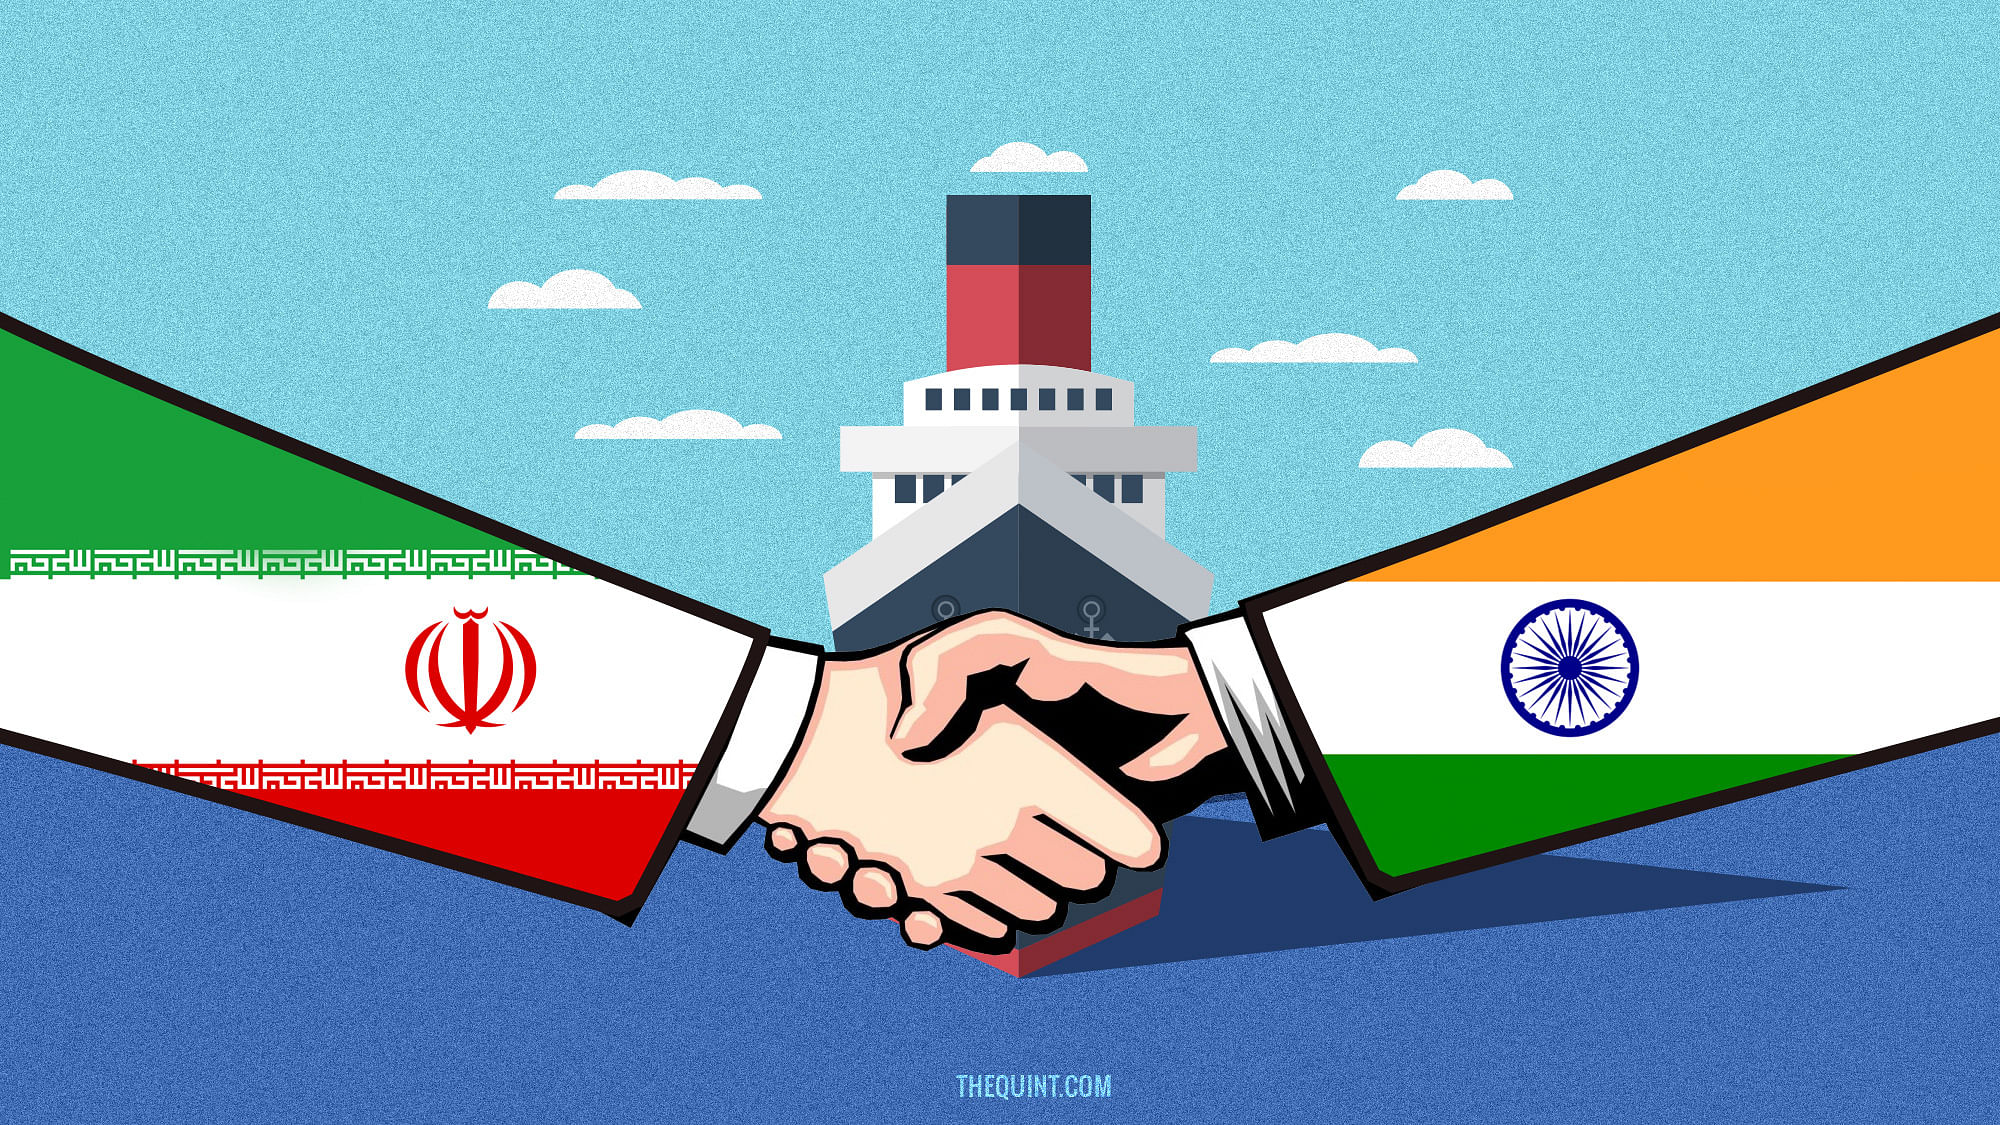 India has taken over operations of the strategic Chabahar port.